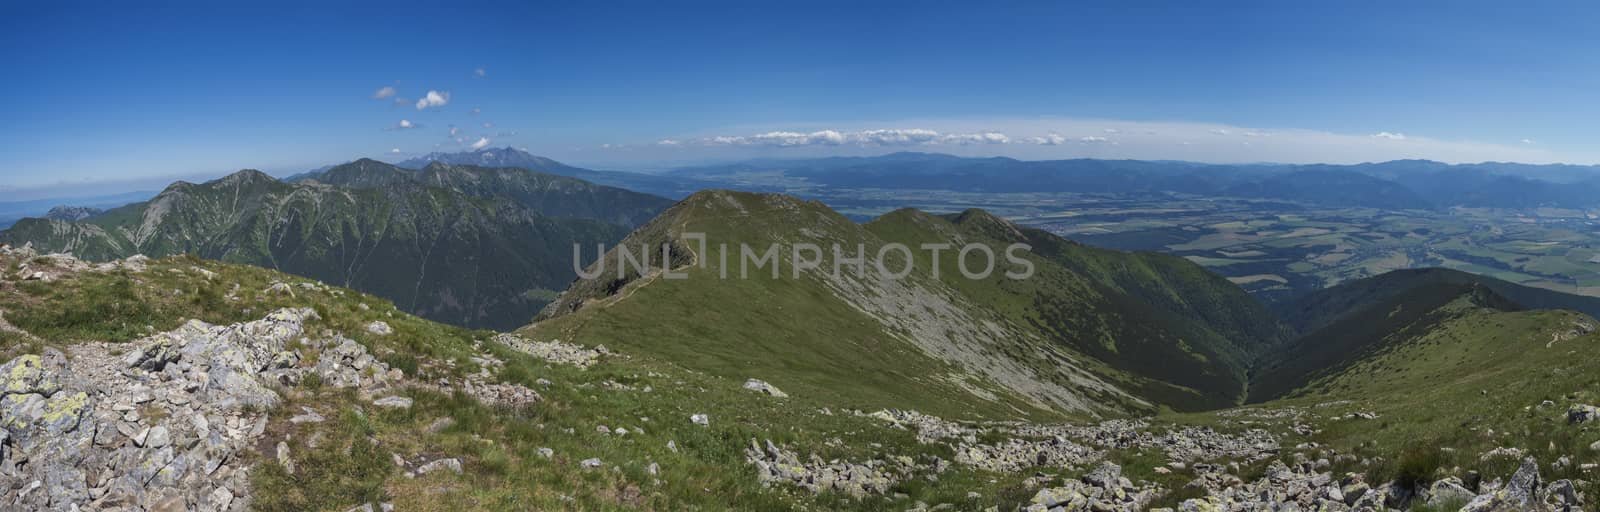 Panoramic view from Baranec peak on Western Tatra mountains Rohace, high tatras and low tatras panorama. Sharp green mountain peaks with hiking trail on ridge. Summer, blue sky white clouds